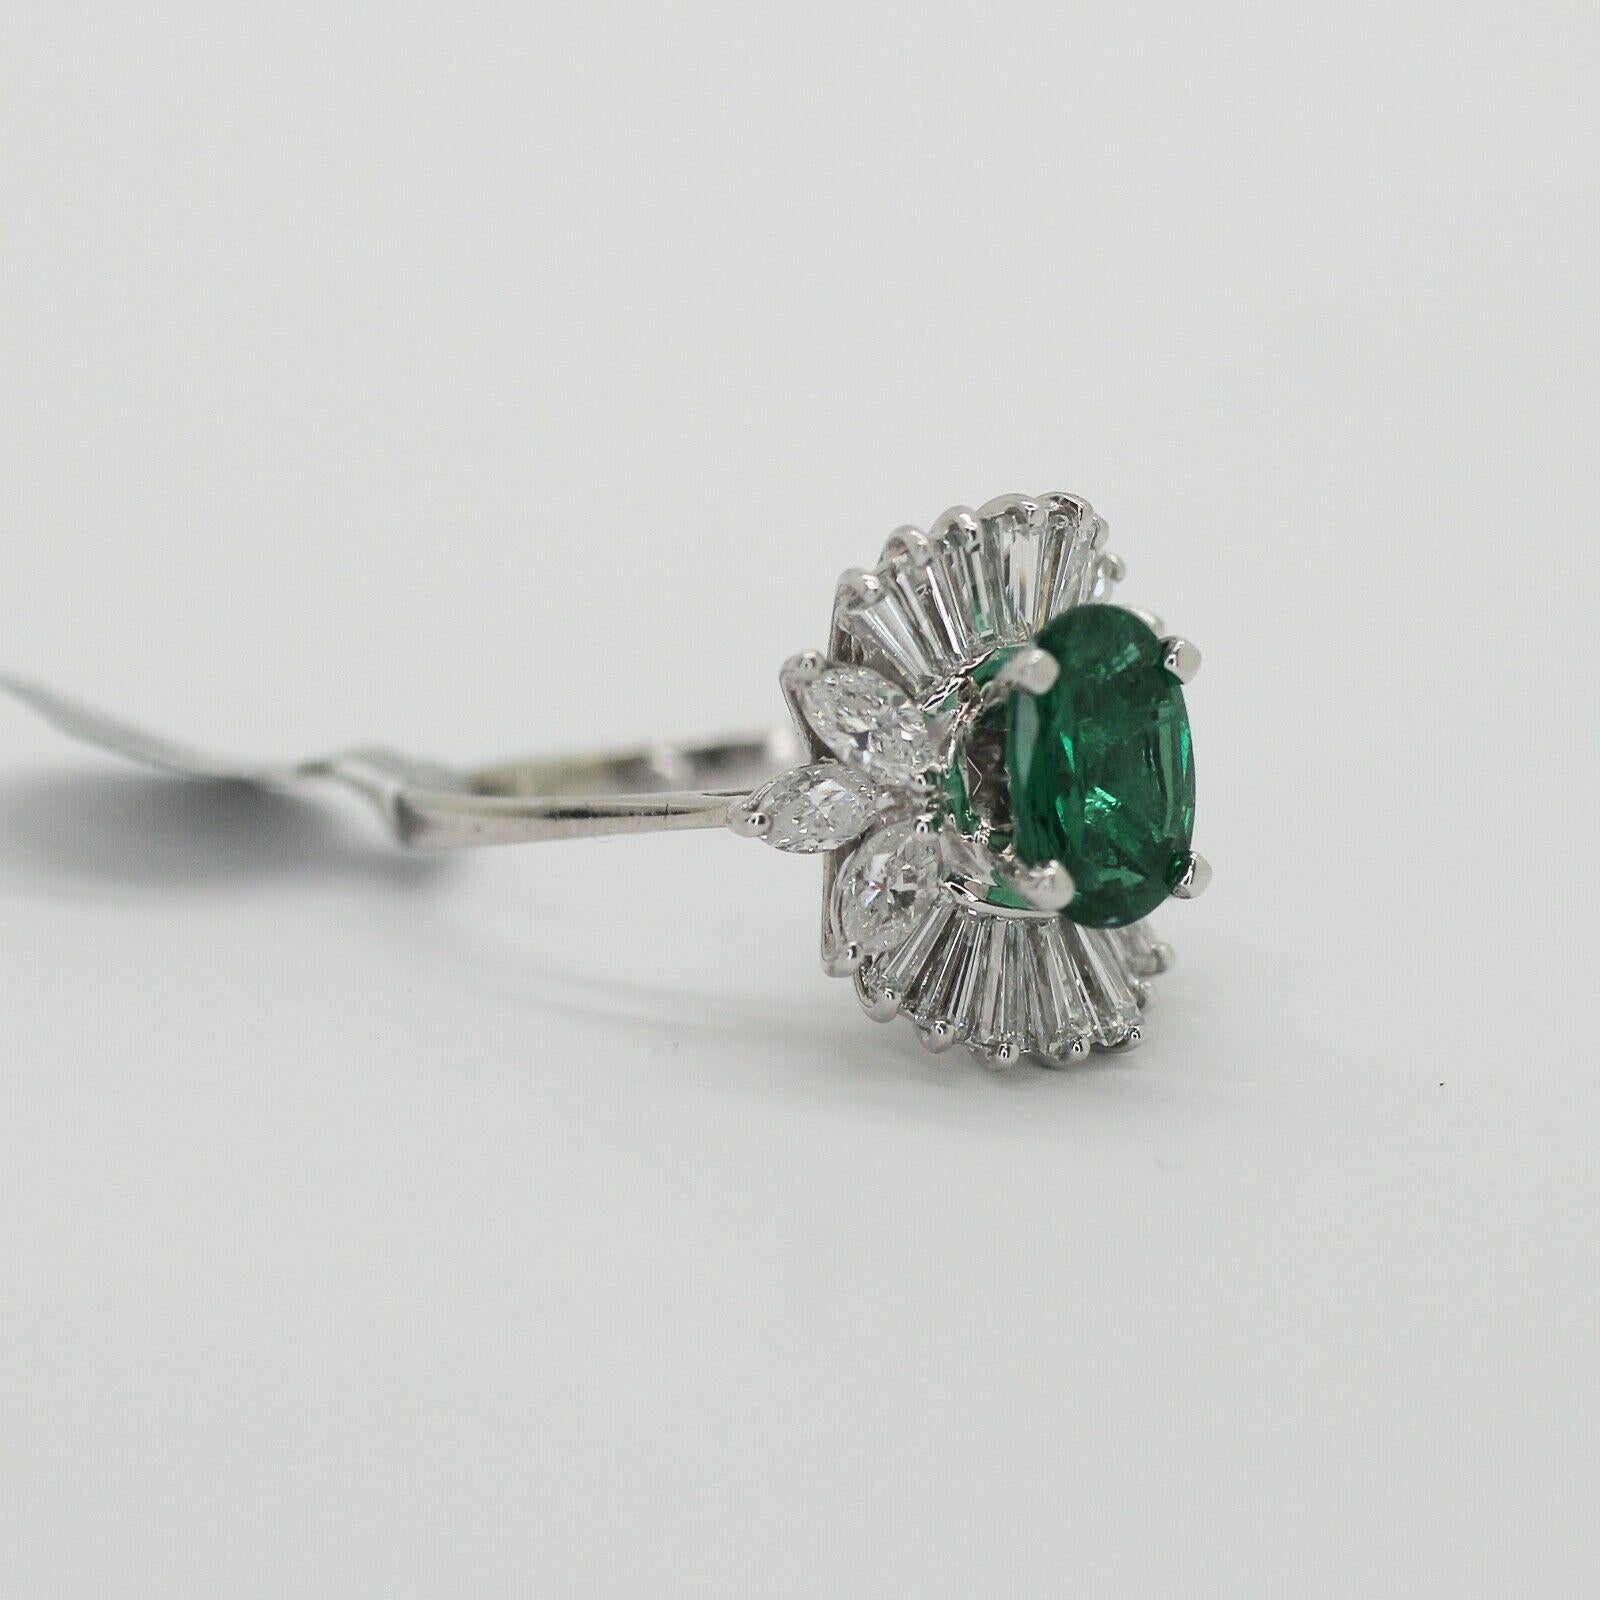 Specifications: 

    CENTER STONE:GREEN EMERALD - OVAL - 1.31CT
    DIAMONDs:  F VS2-
    APPROXIMATELY 1.15 CTW 
    metal:18K WHITE GOLD
    type:RING
    weight:5.26 GrS
    RING size:7.5
    hallmark:18K

